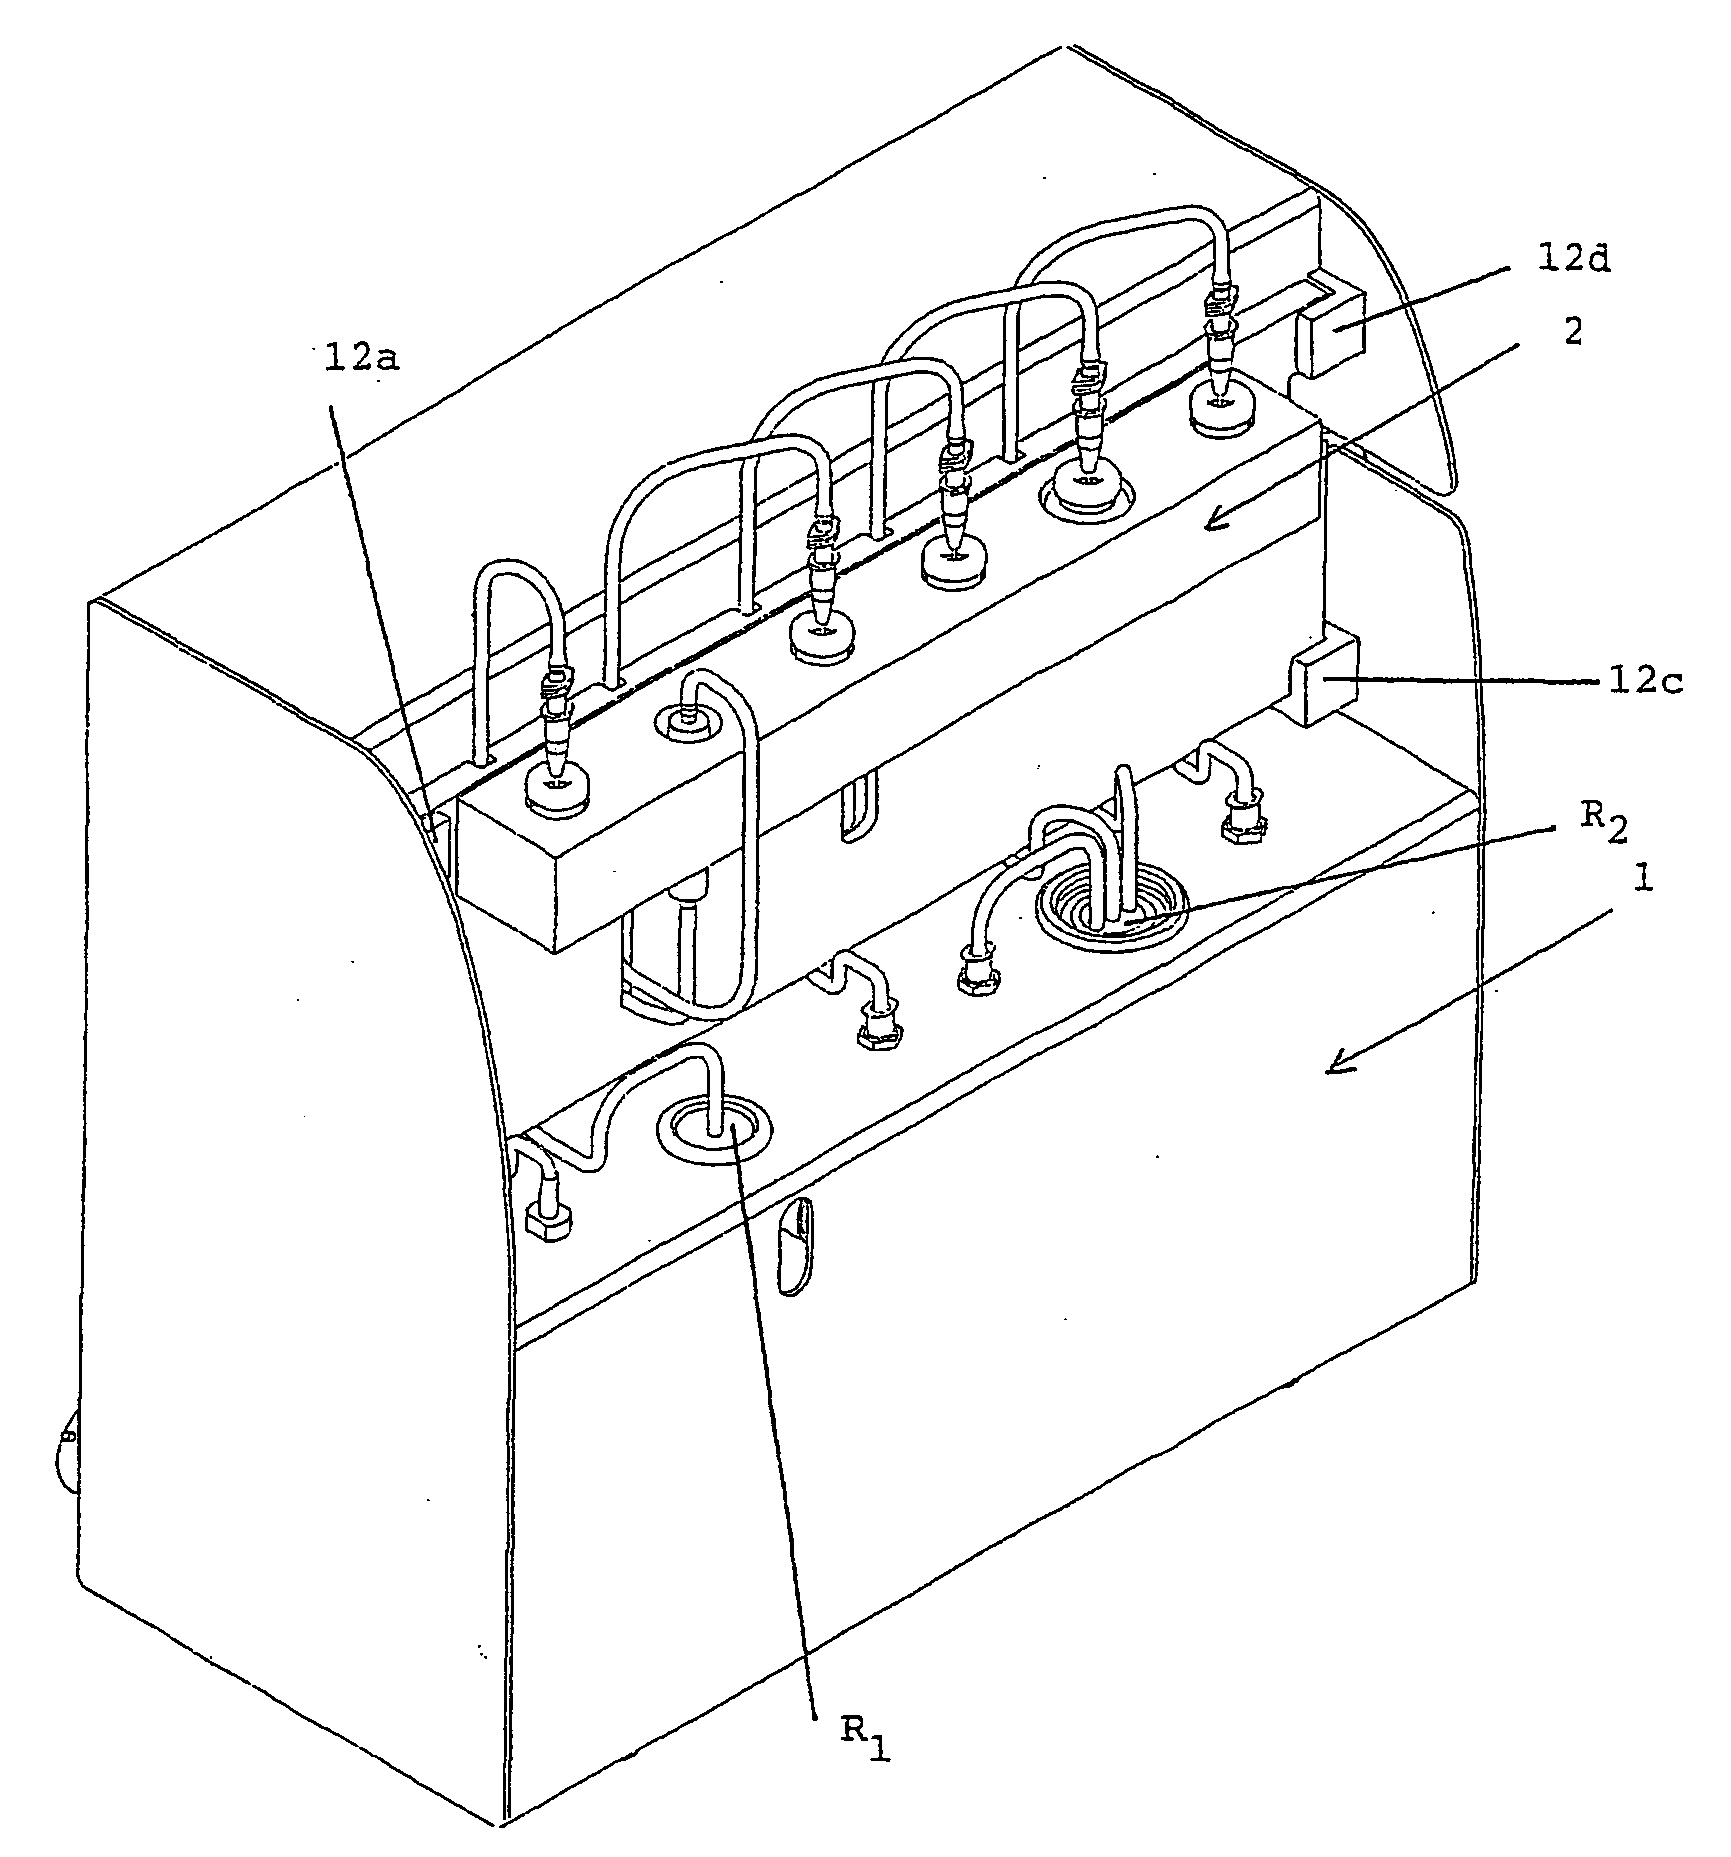 Device for synthesis of radiopharmaceutical products